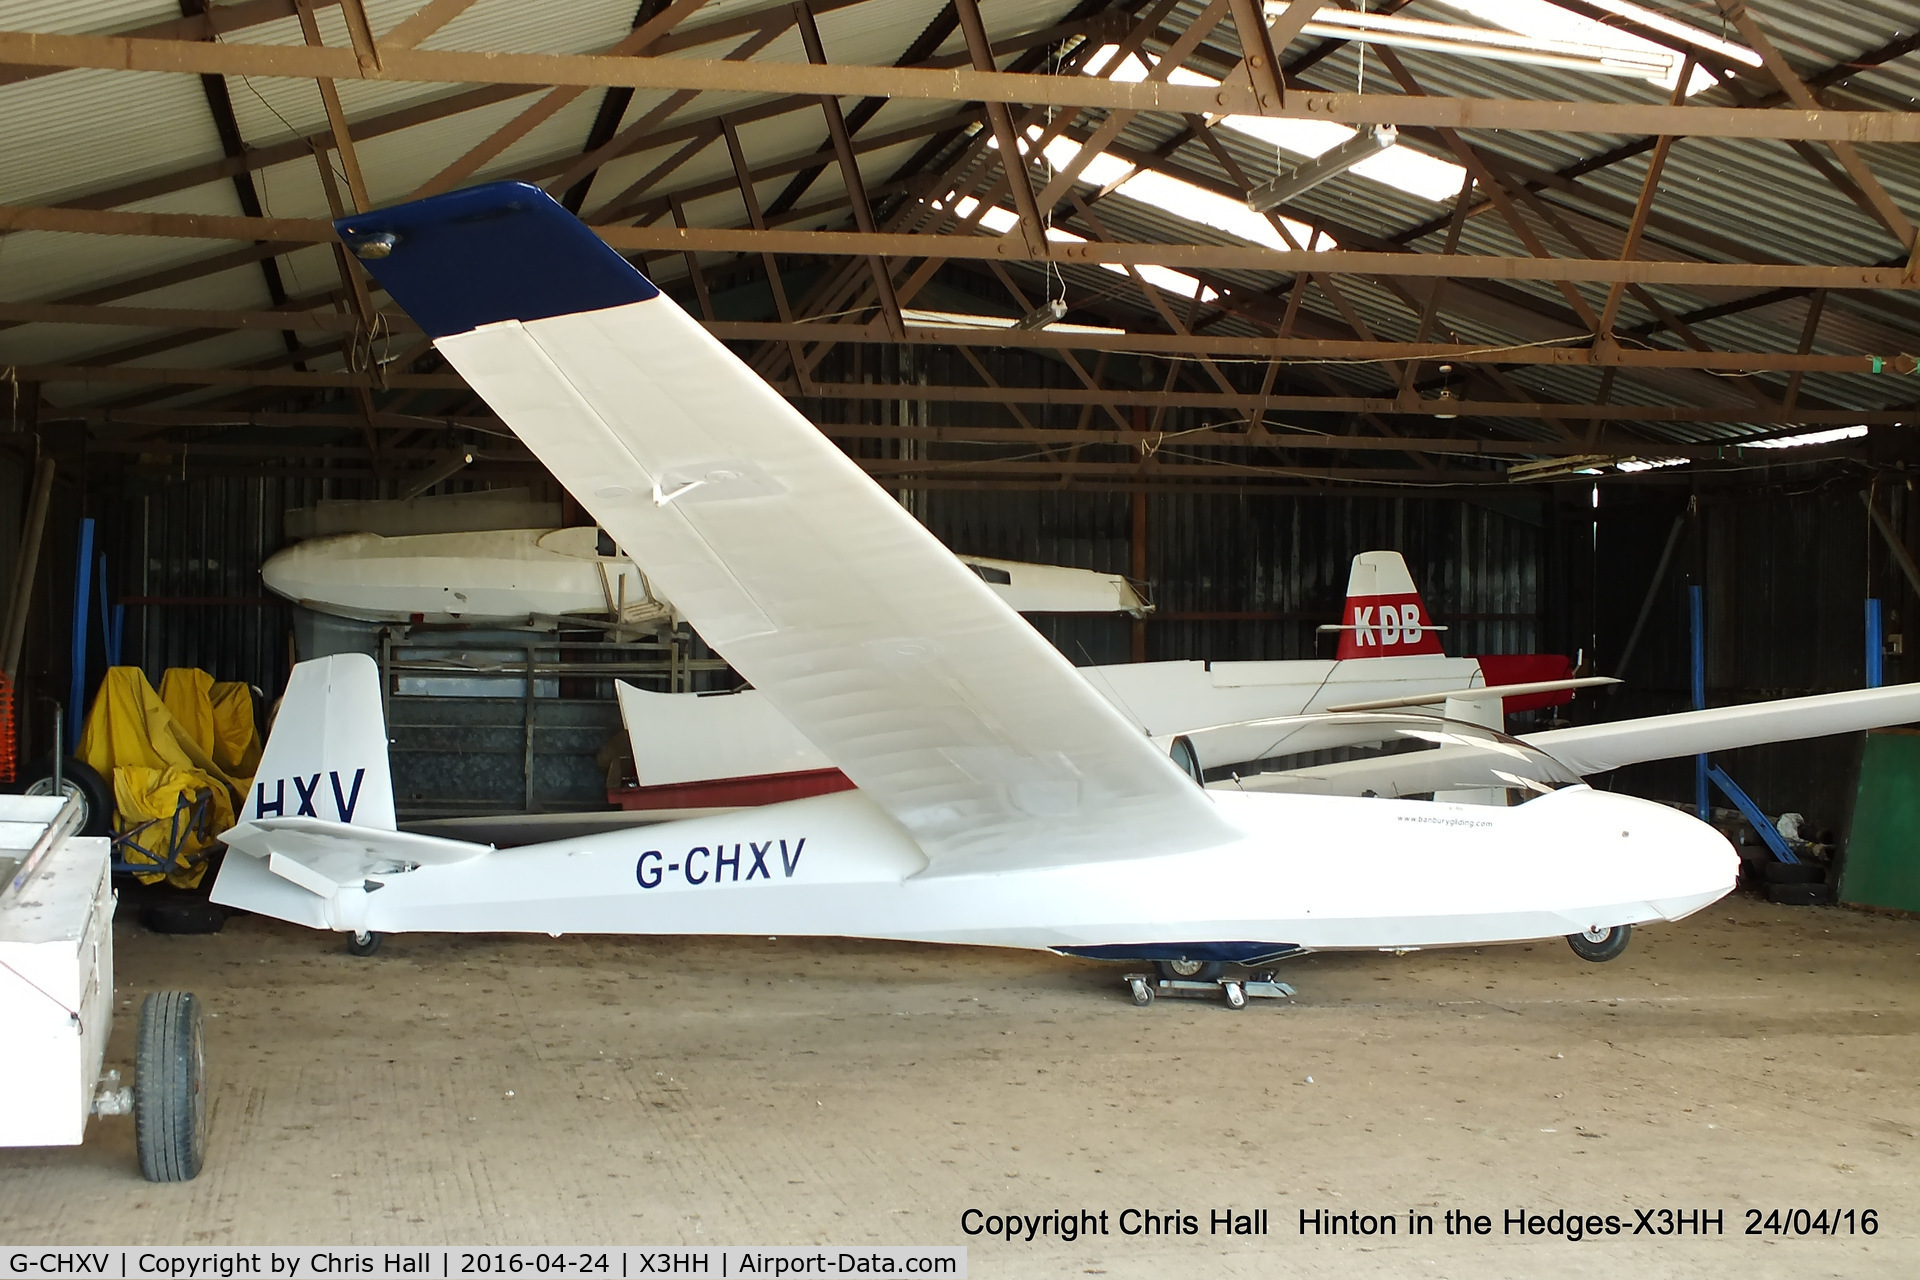 G-CHXV, 1968 Schleicher ASK-13 C/N 13080, at Hinton in the Hedges